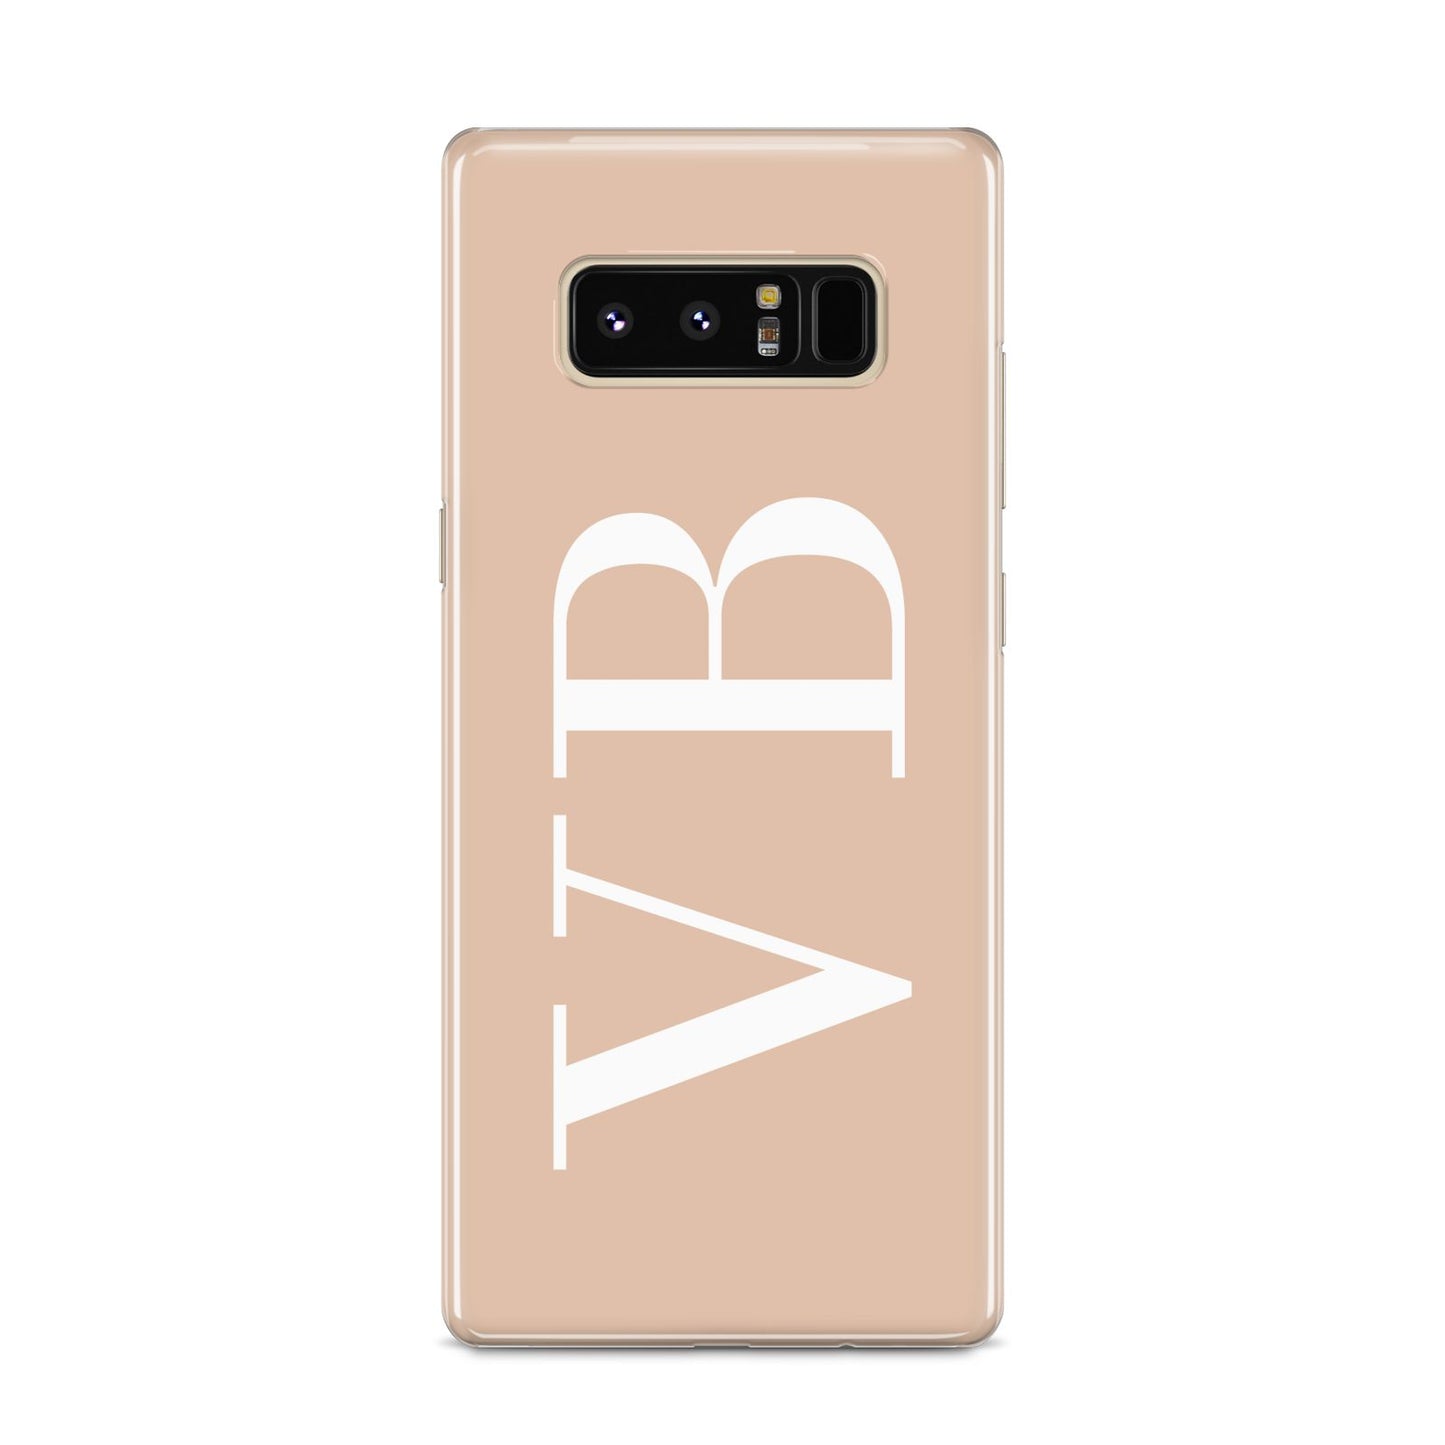 Nude And White Personalised Samsung Galaxy S8 Case